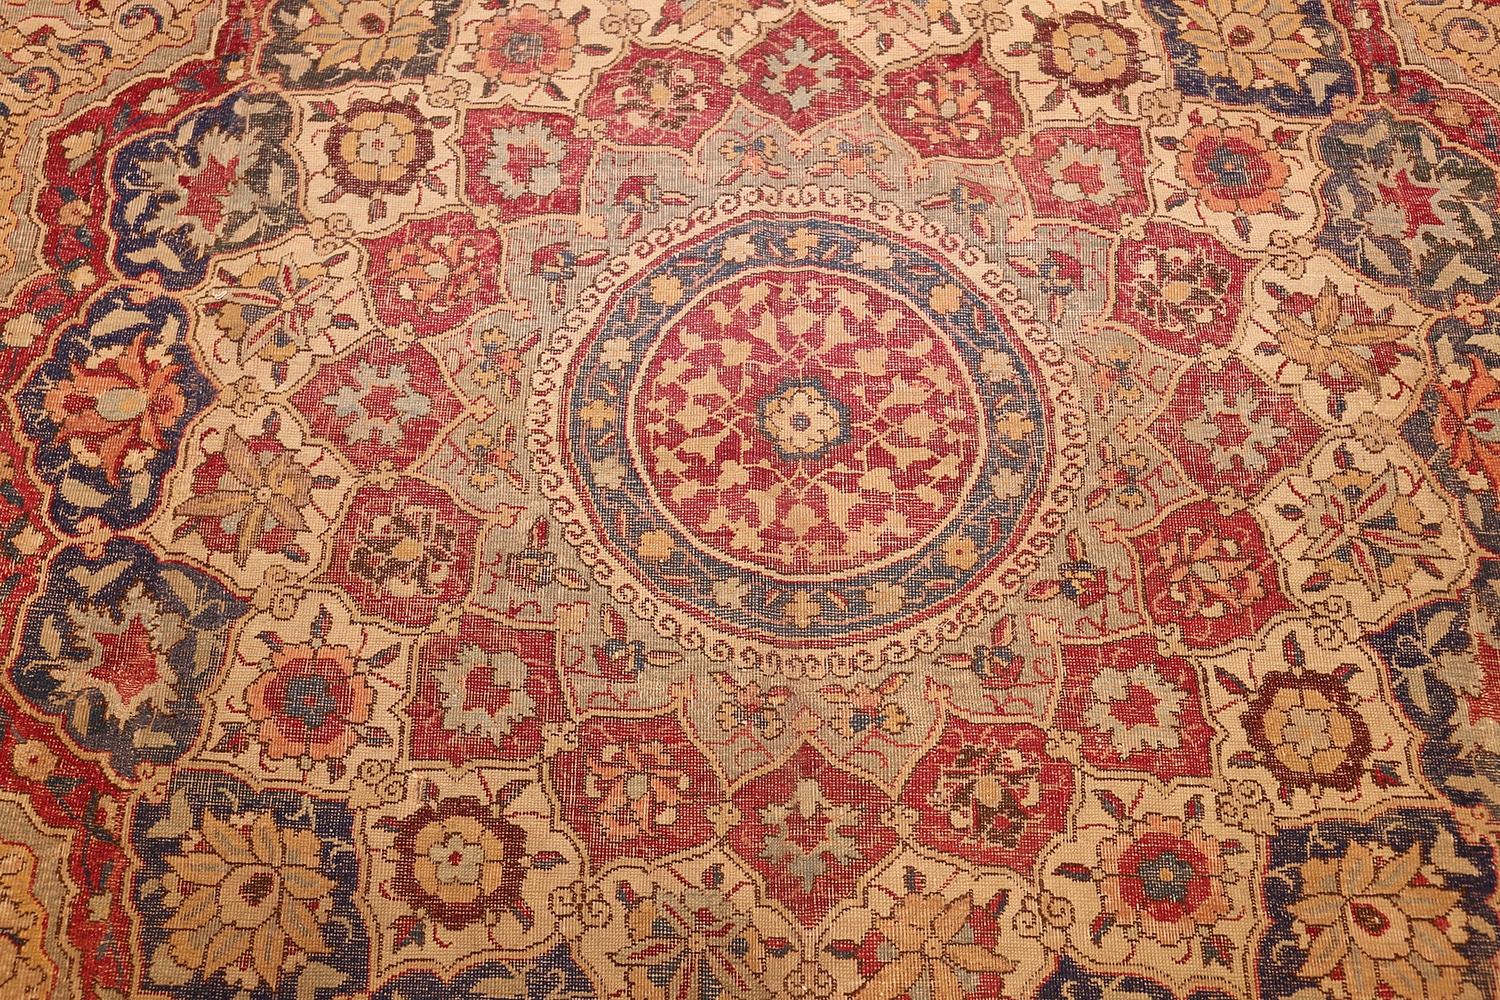 Beautiful 17th Century Mughal Gallery Carpet - Size: 9 ft x 24 ft 8 in (2.74 m x 7.52 m)